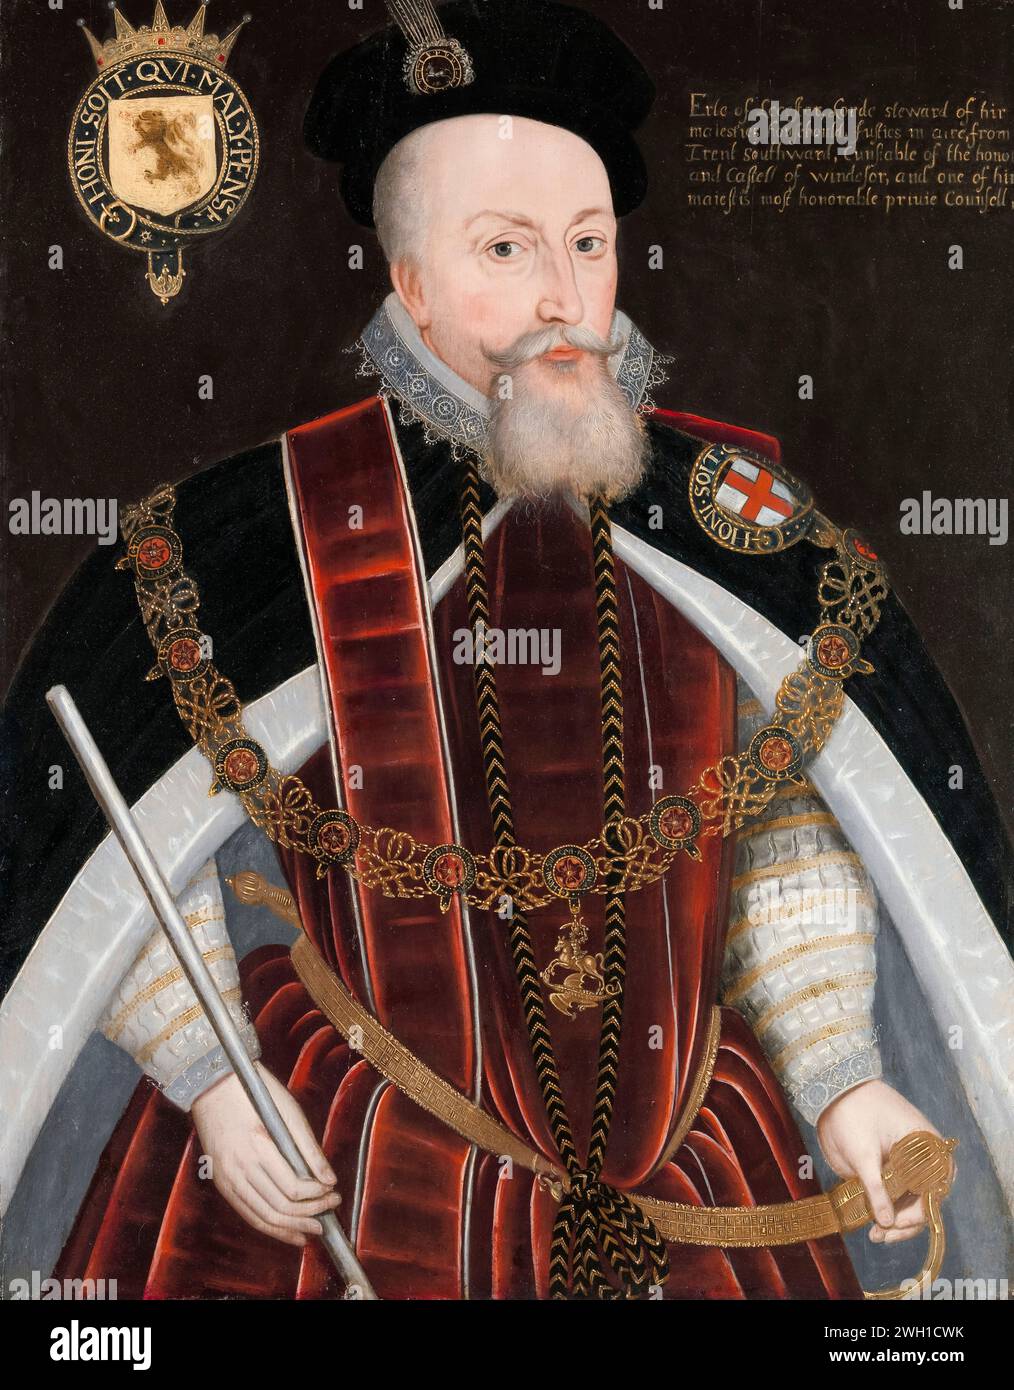 Robert Dudley, 1st Earl of Leicester (1532-1588), portrait painting in oil on panel, circa 1595 Stock Photo